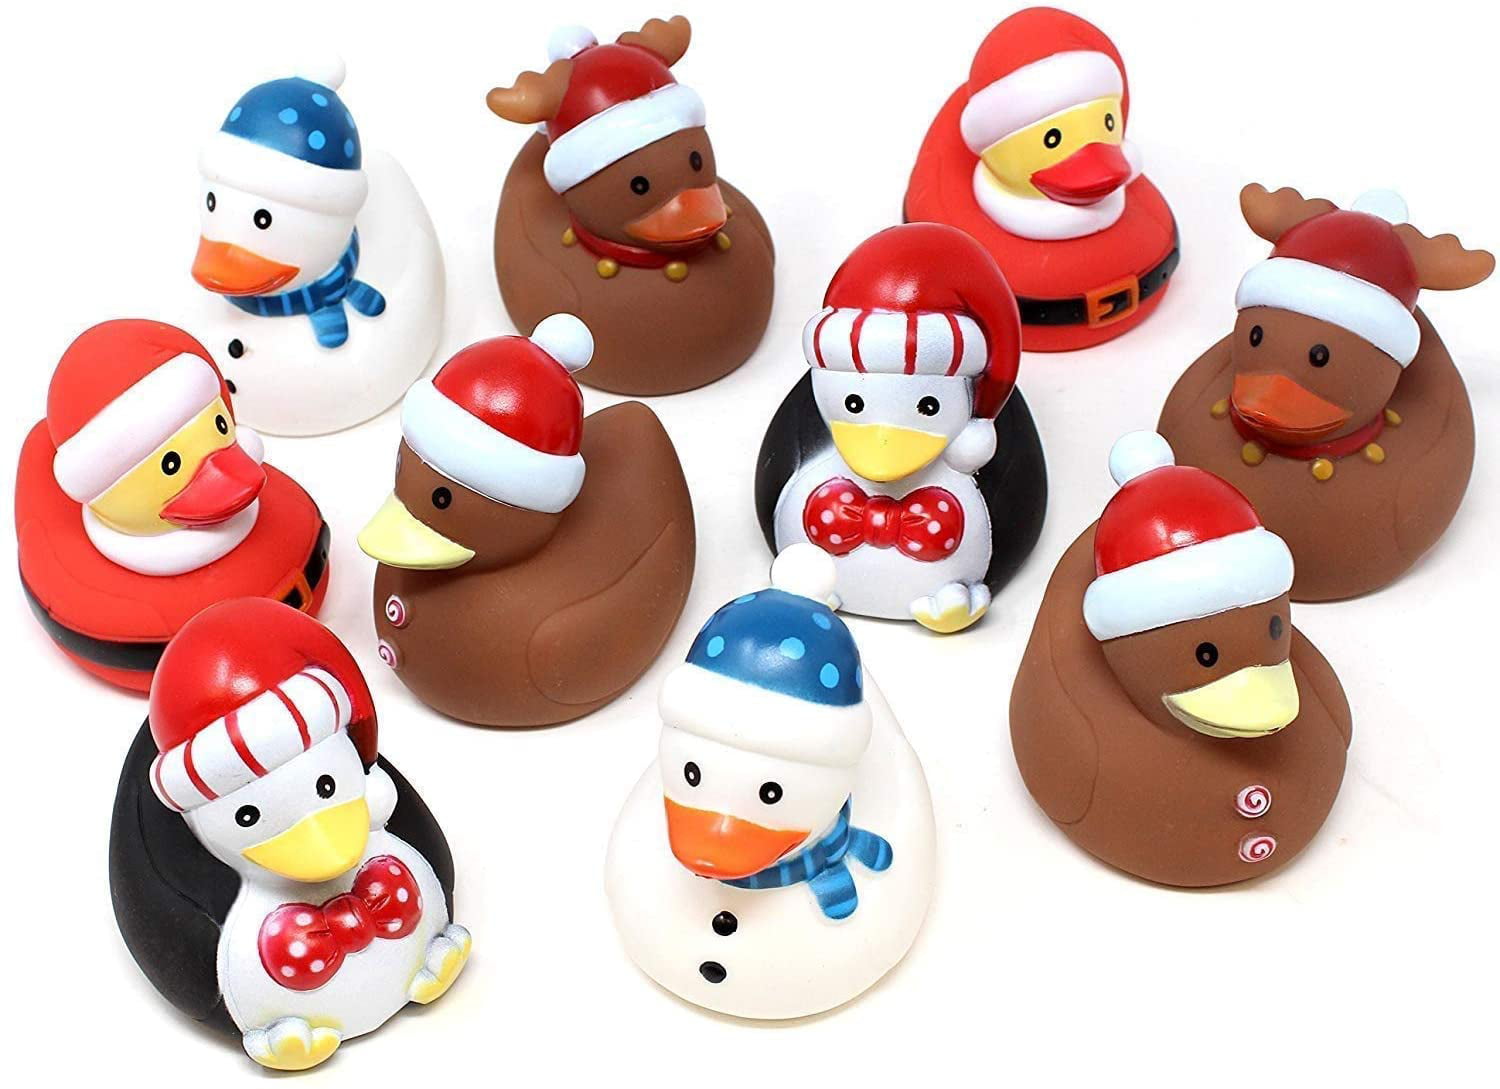 School Classroom Prizes Ducky Toy 10 PCs Stocking Stuffers and Party Favors JOYIN 3 Christmas Holiday Character Rubber Ducks for Fun Bath Squirt Squeaker Duckies 